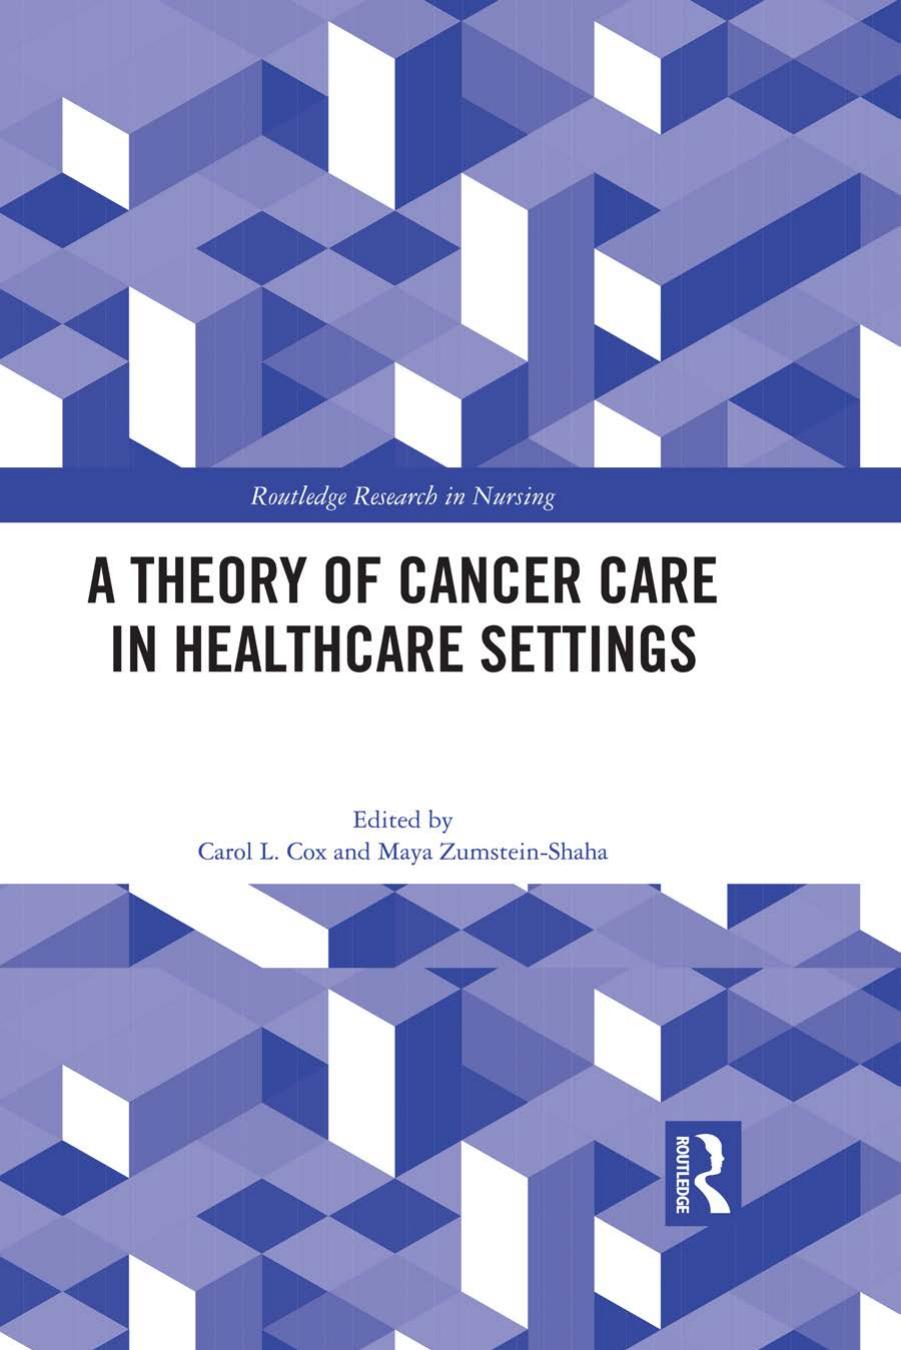 A Theory of Cancer Care in Healthcare Settings(2018)